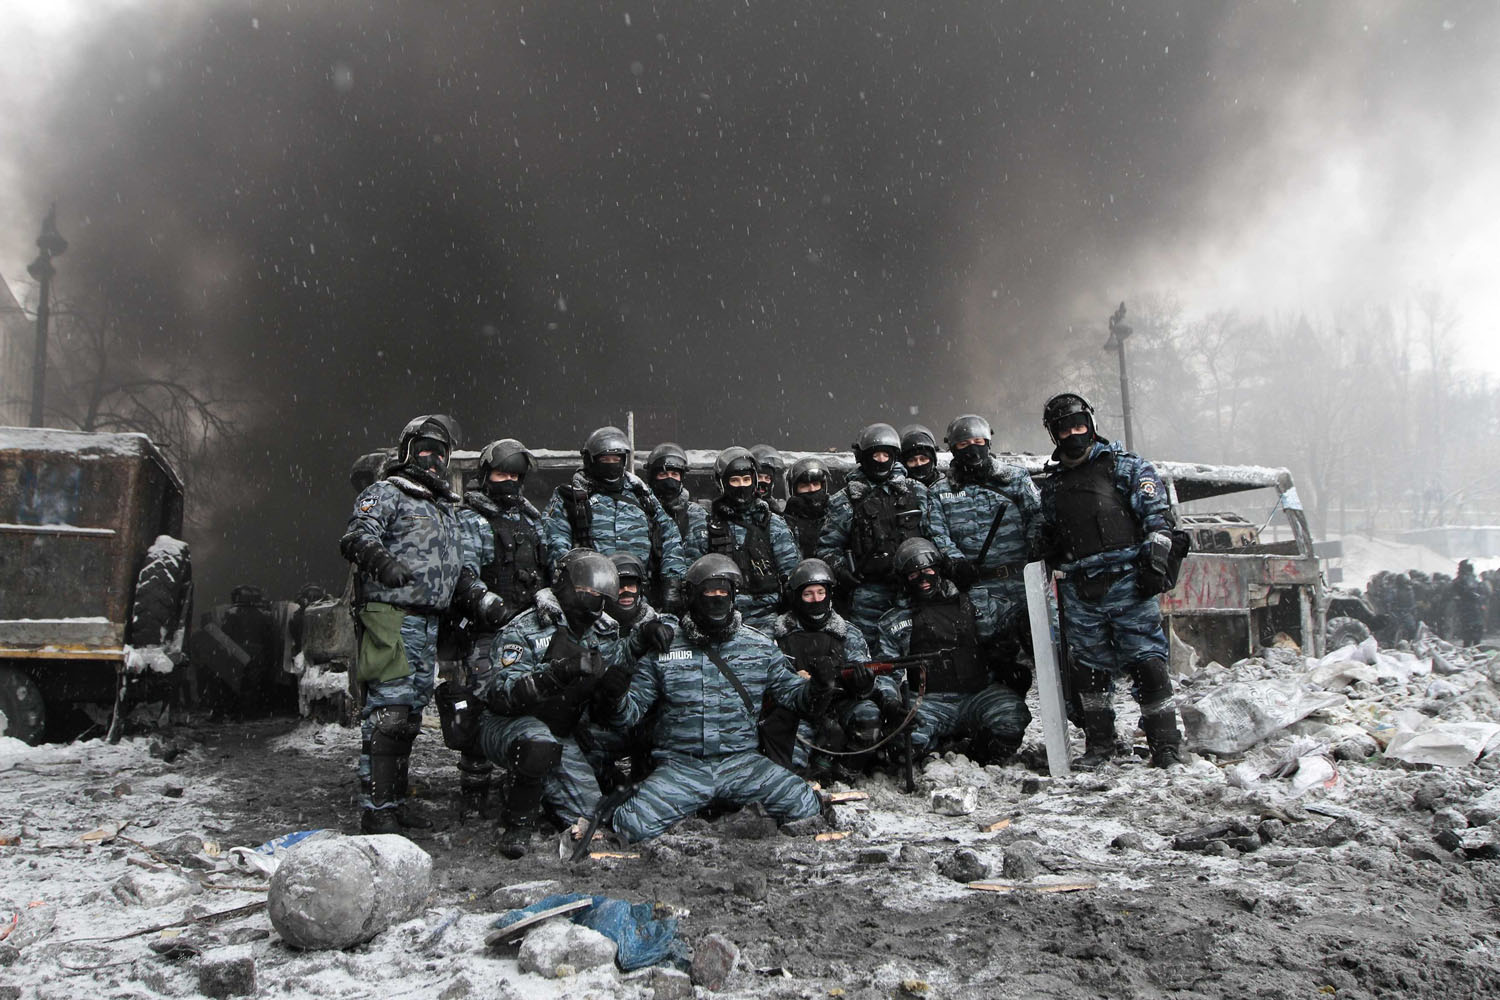 Jan. 22, 2014. Riot police officers pose for a picture near burnt vehicles as smoke rises in the background during clashes with pro-European protesters in Kiev, Ukraine.